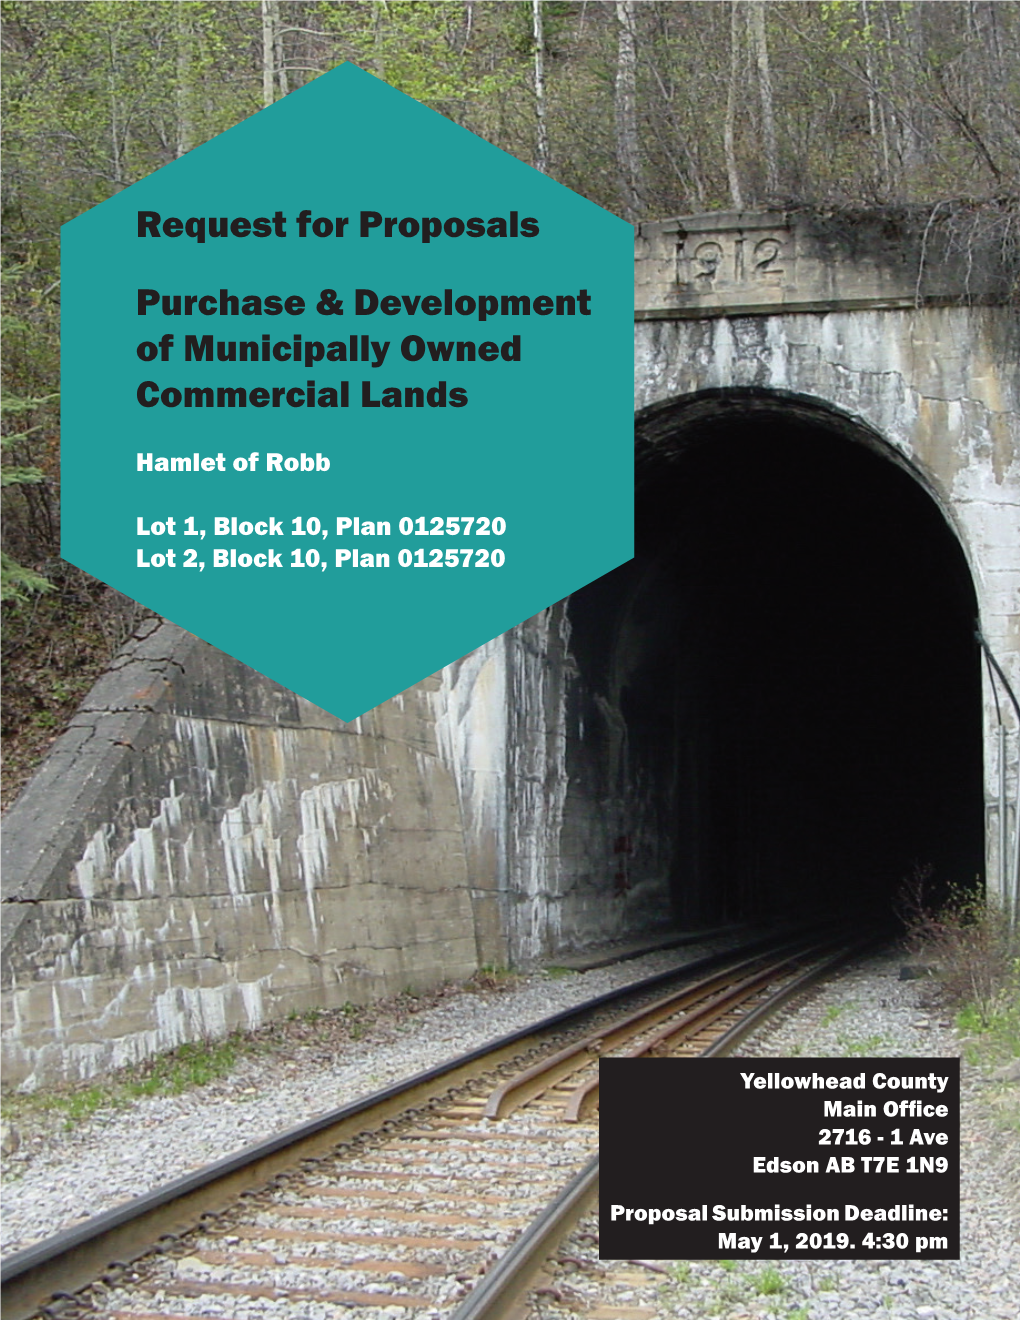 Request for Proposals Purchase & Development of Municipally Owned